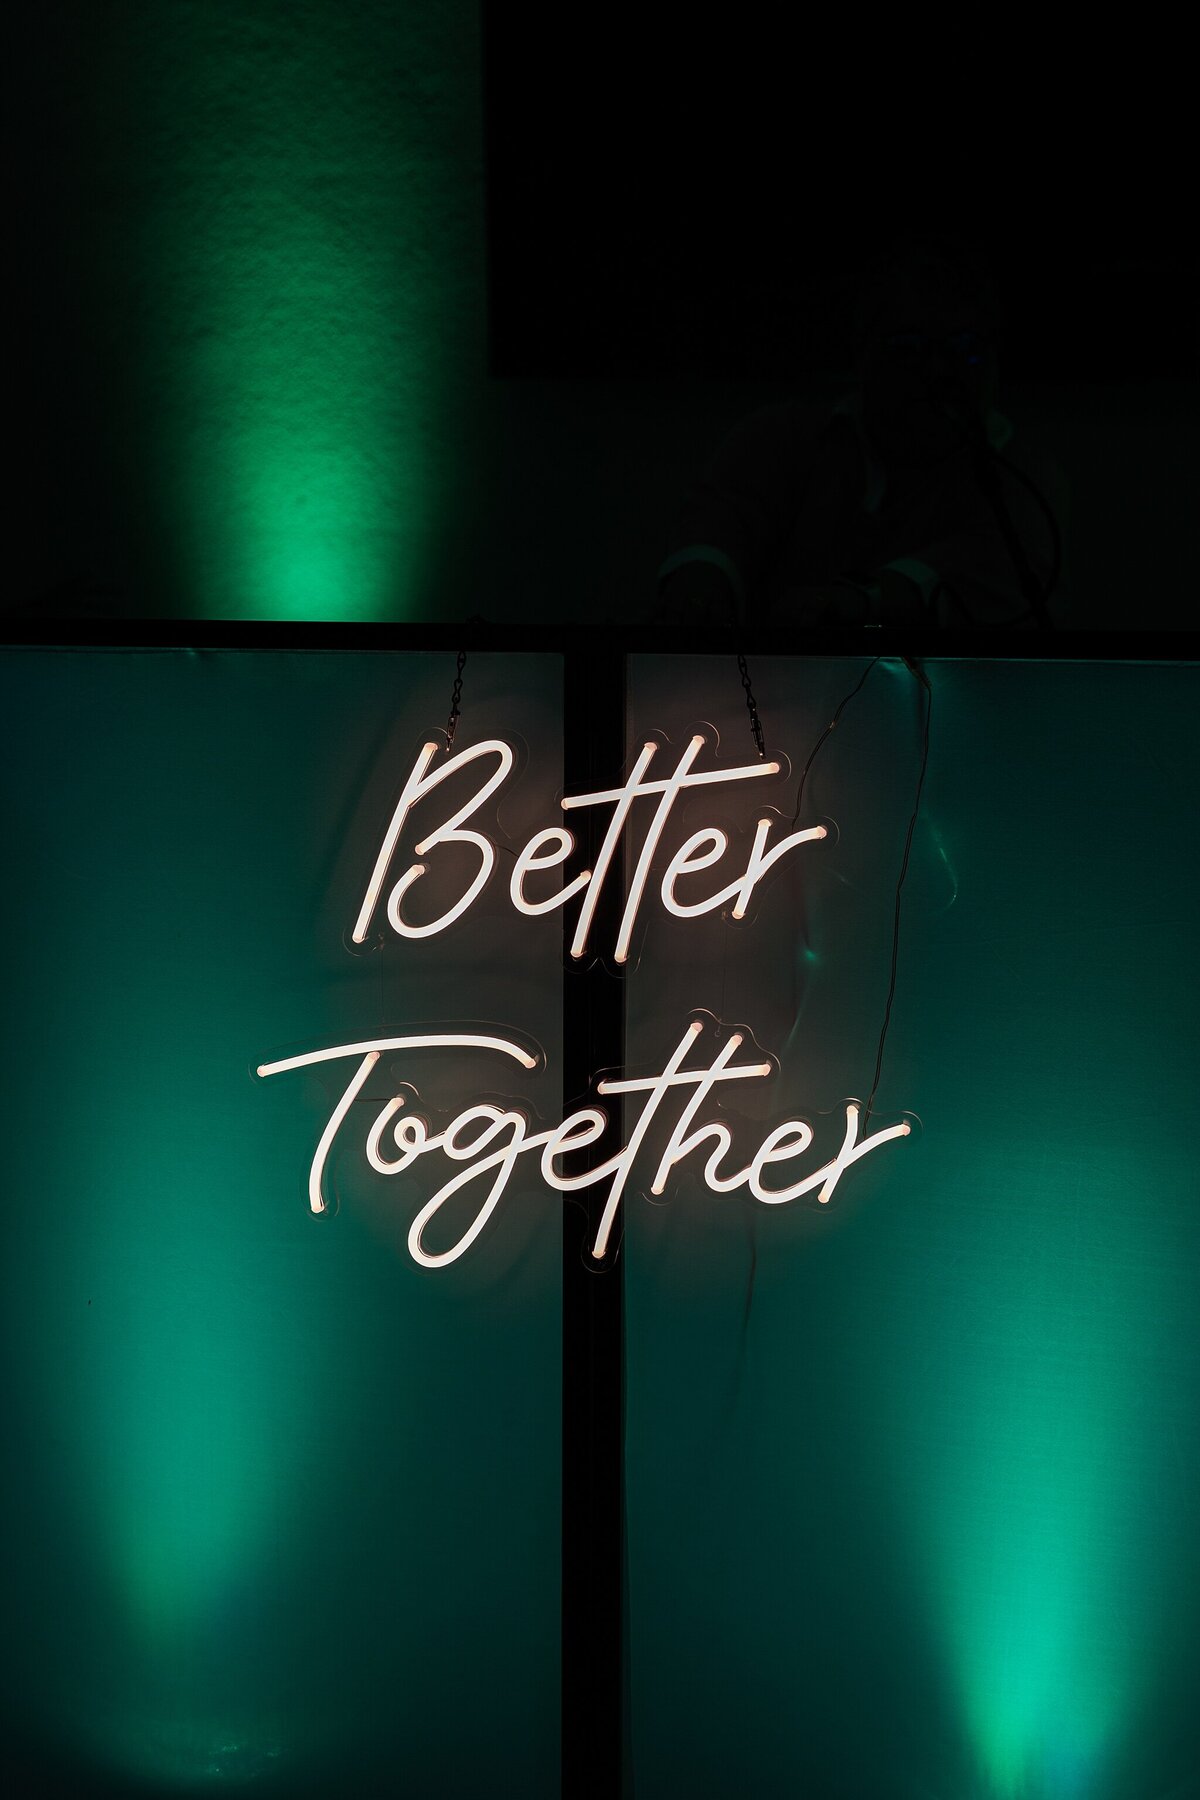 A detail shot of a neon sign reading "Better Together." The sign is bathed in blue green light from multiple floor lights surrounding it.